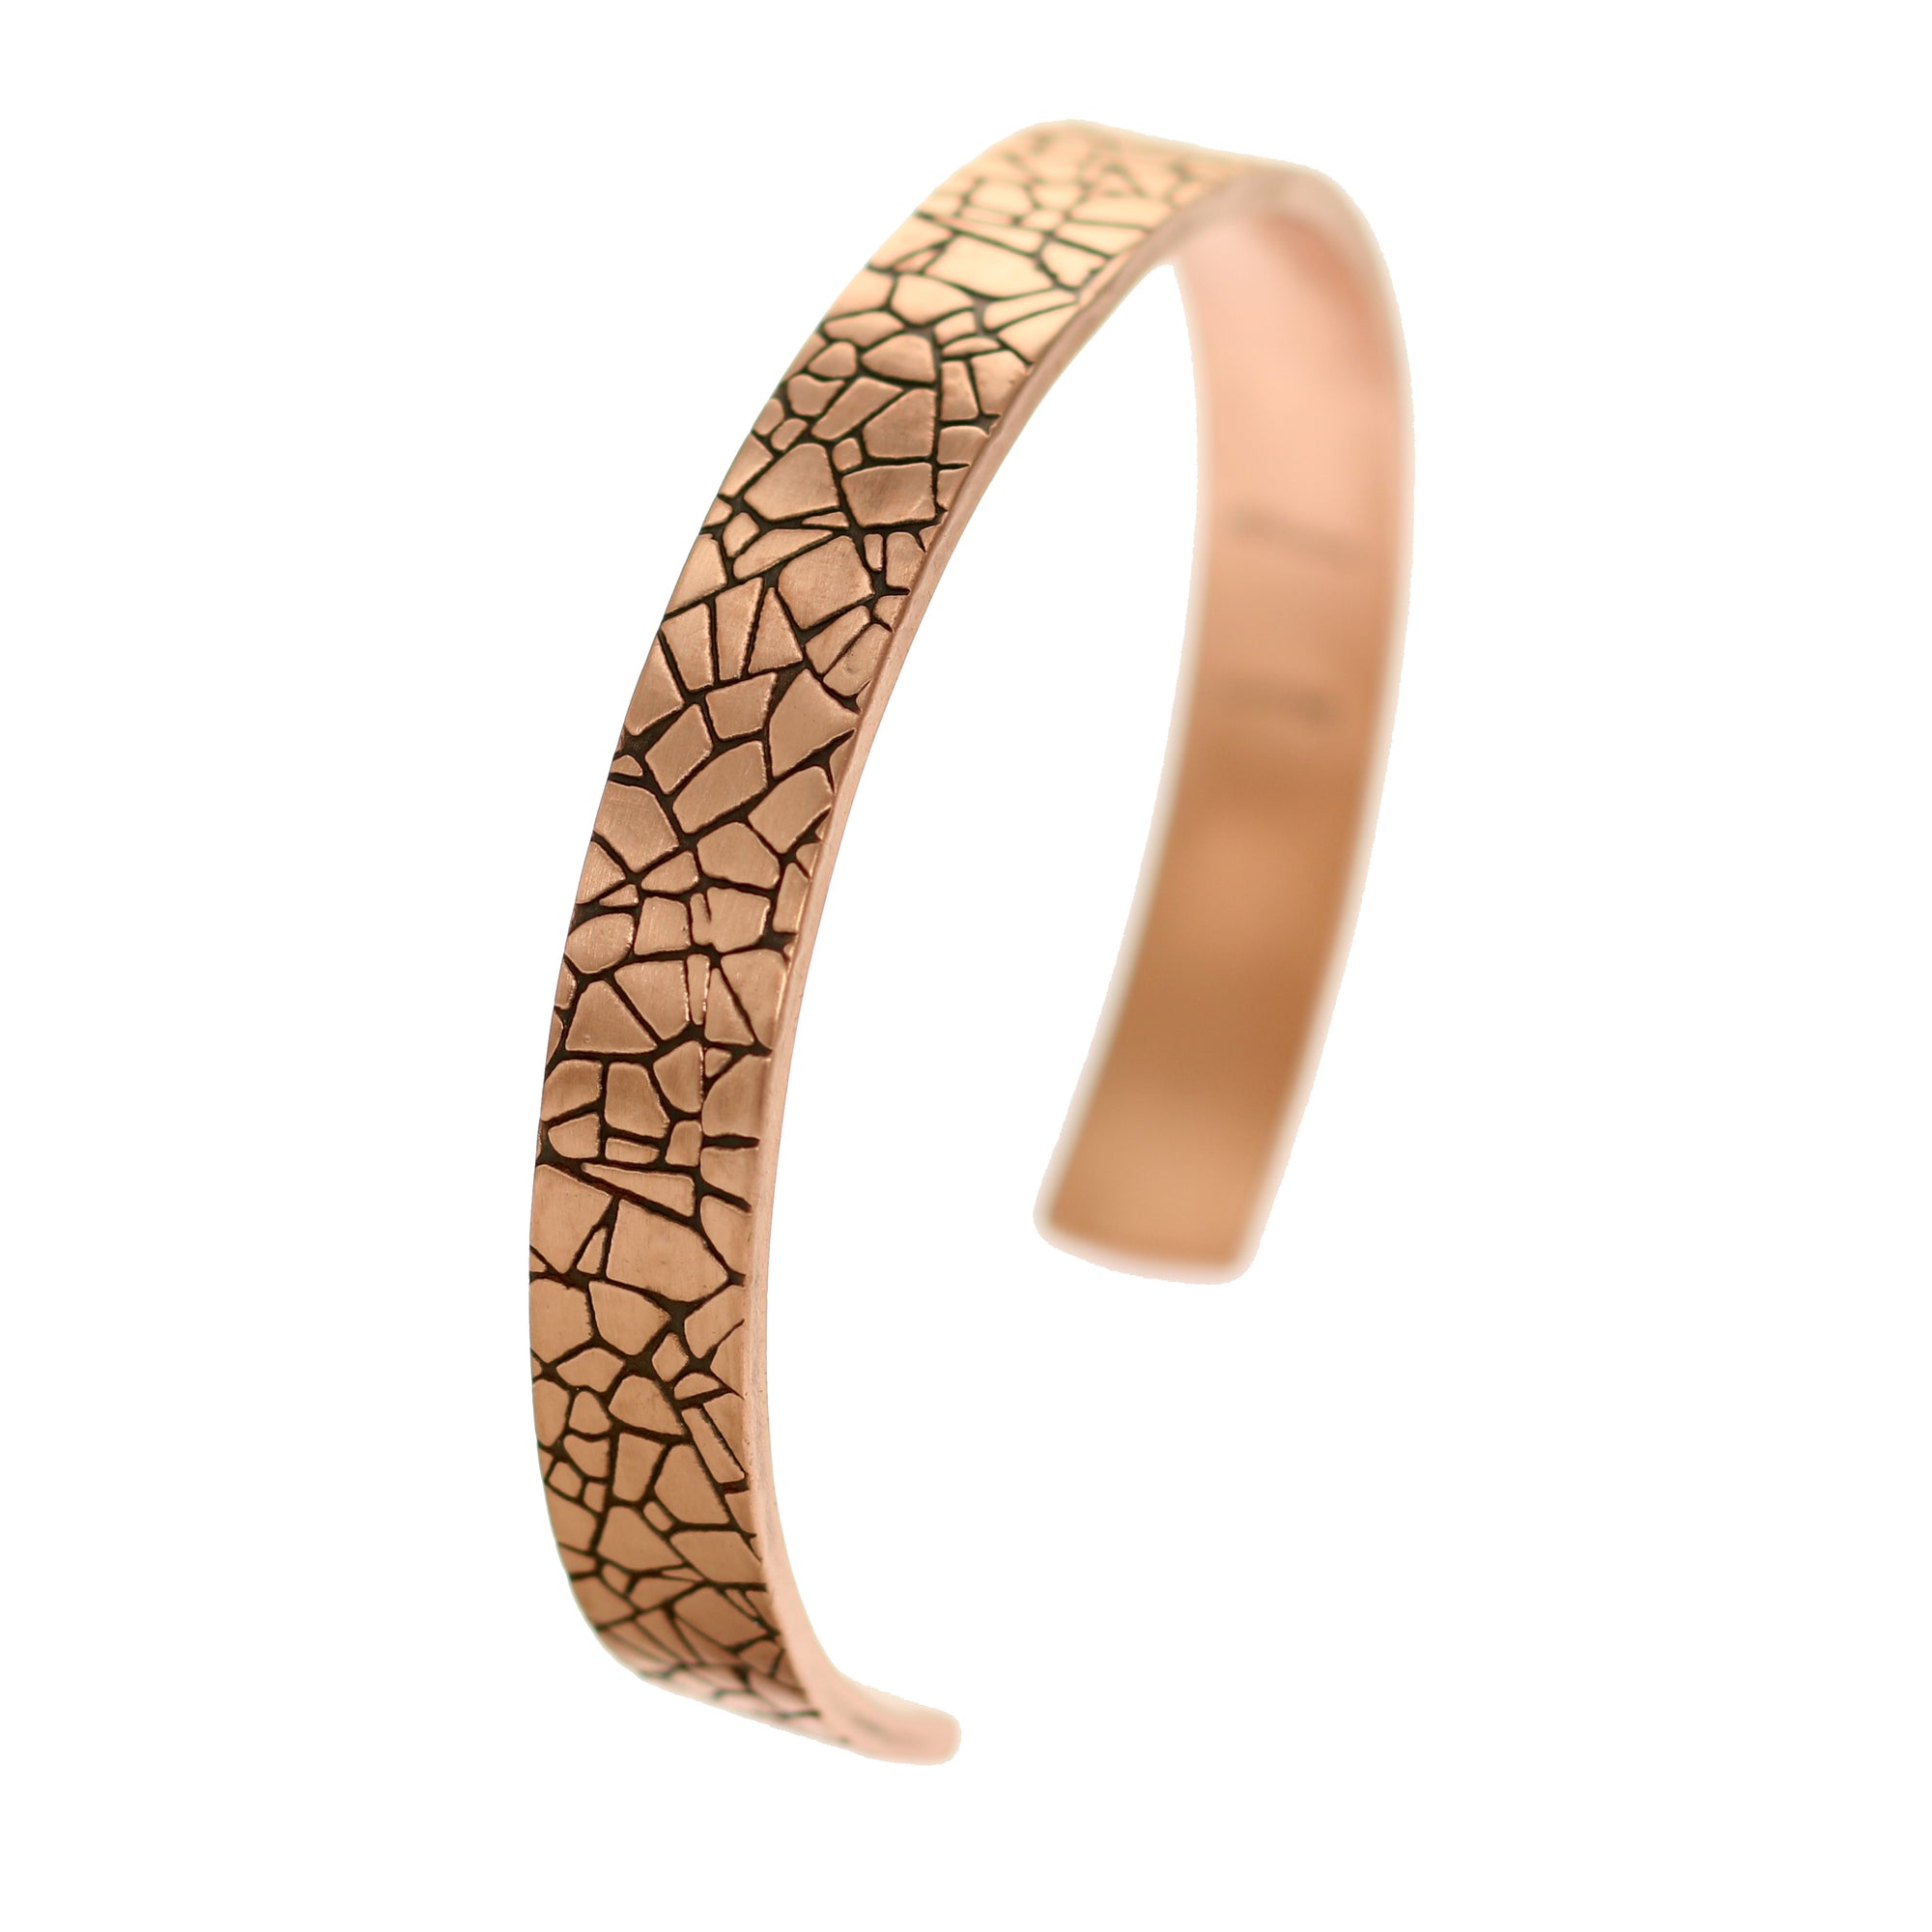 10mm Wide Men's Embossed Mosaic Solid Copper Cuff